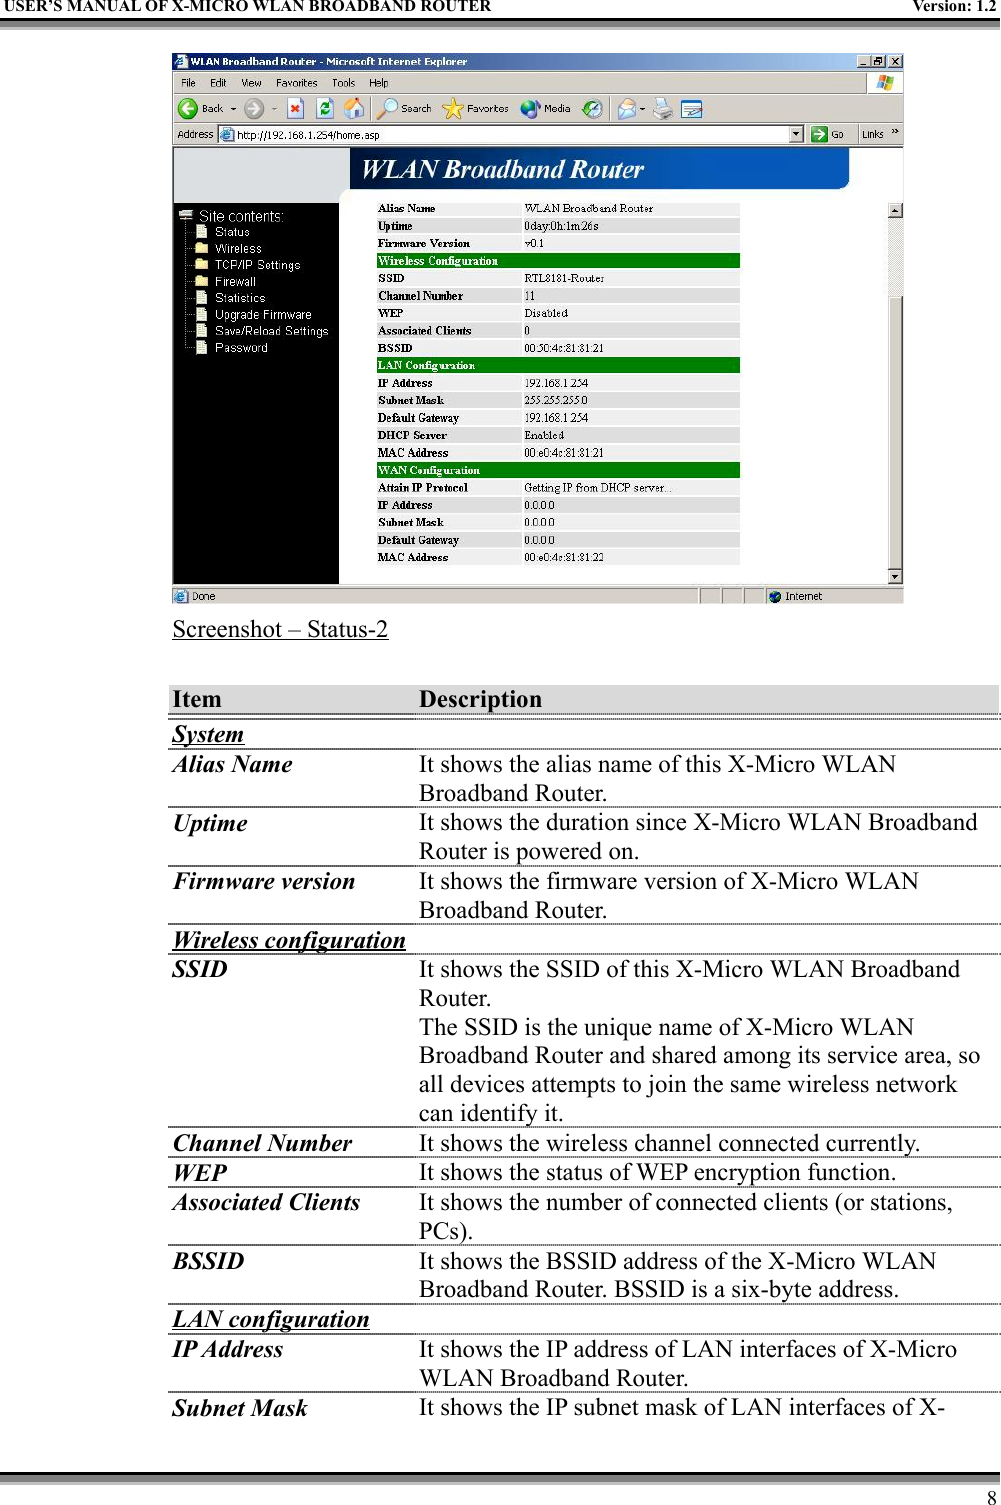 USER’S MANUAL OF X-MICRO WLAN BROADBAND ROUTER Version: 1.28Screenshot – Status-2Item DescriptionSystemAlias Name It shows the alias name of this X-Micro WLANBroadband Router.Uptime It shows the duration since X-Micro WLAN BroadbandRouter is powered on.Firmware version It shows the firmware version of X-Micro WLANBroadband Router.Wireless configurationSSID It shows the SSID of this X-Micro WLAN BroadbandRouter.The SSID is the unique name of X-Micro WLANBroadband Router and shared among its service area, soall devices attempts to join the same wireless networkcan identify it.Channel Number It shows the wireless channel connected currently.WEP It shows the status of WEP encryption function.Associated Clients It shows the number of connected clients (or stations,PCs).BSSID It shows the BSSID address of the X-Micro WLANBroadband Router. BSSID is a six-byte address.LAN configurationIP Address It shows the IP address of LAN interfaces of X-MicroWLAN Broadband Router.Subnet Mask It shows the IP subnet mask of LAN interfaces of X-